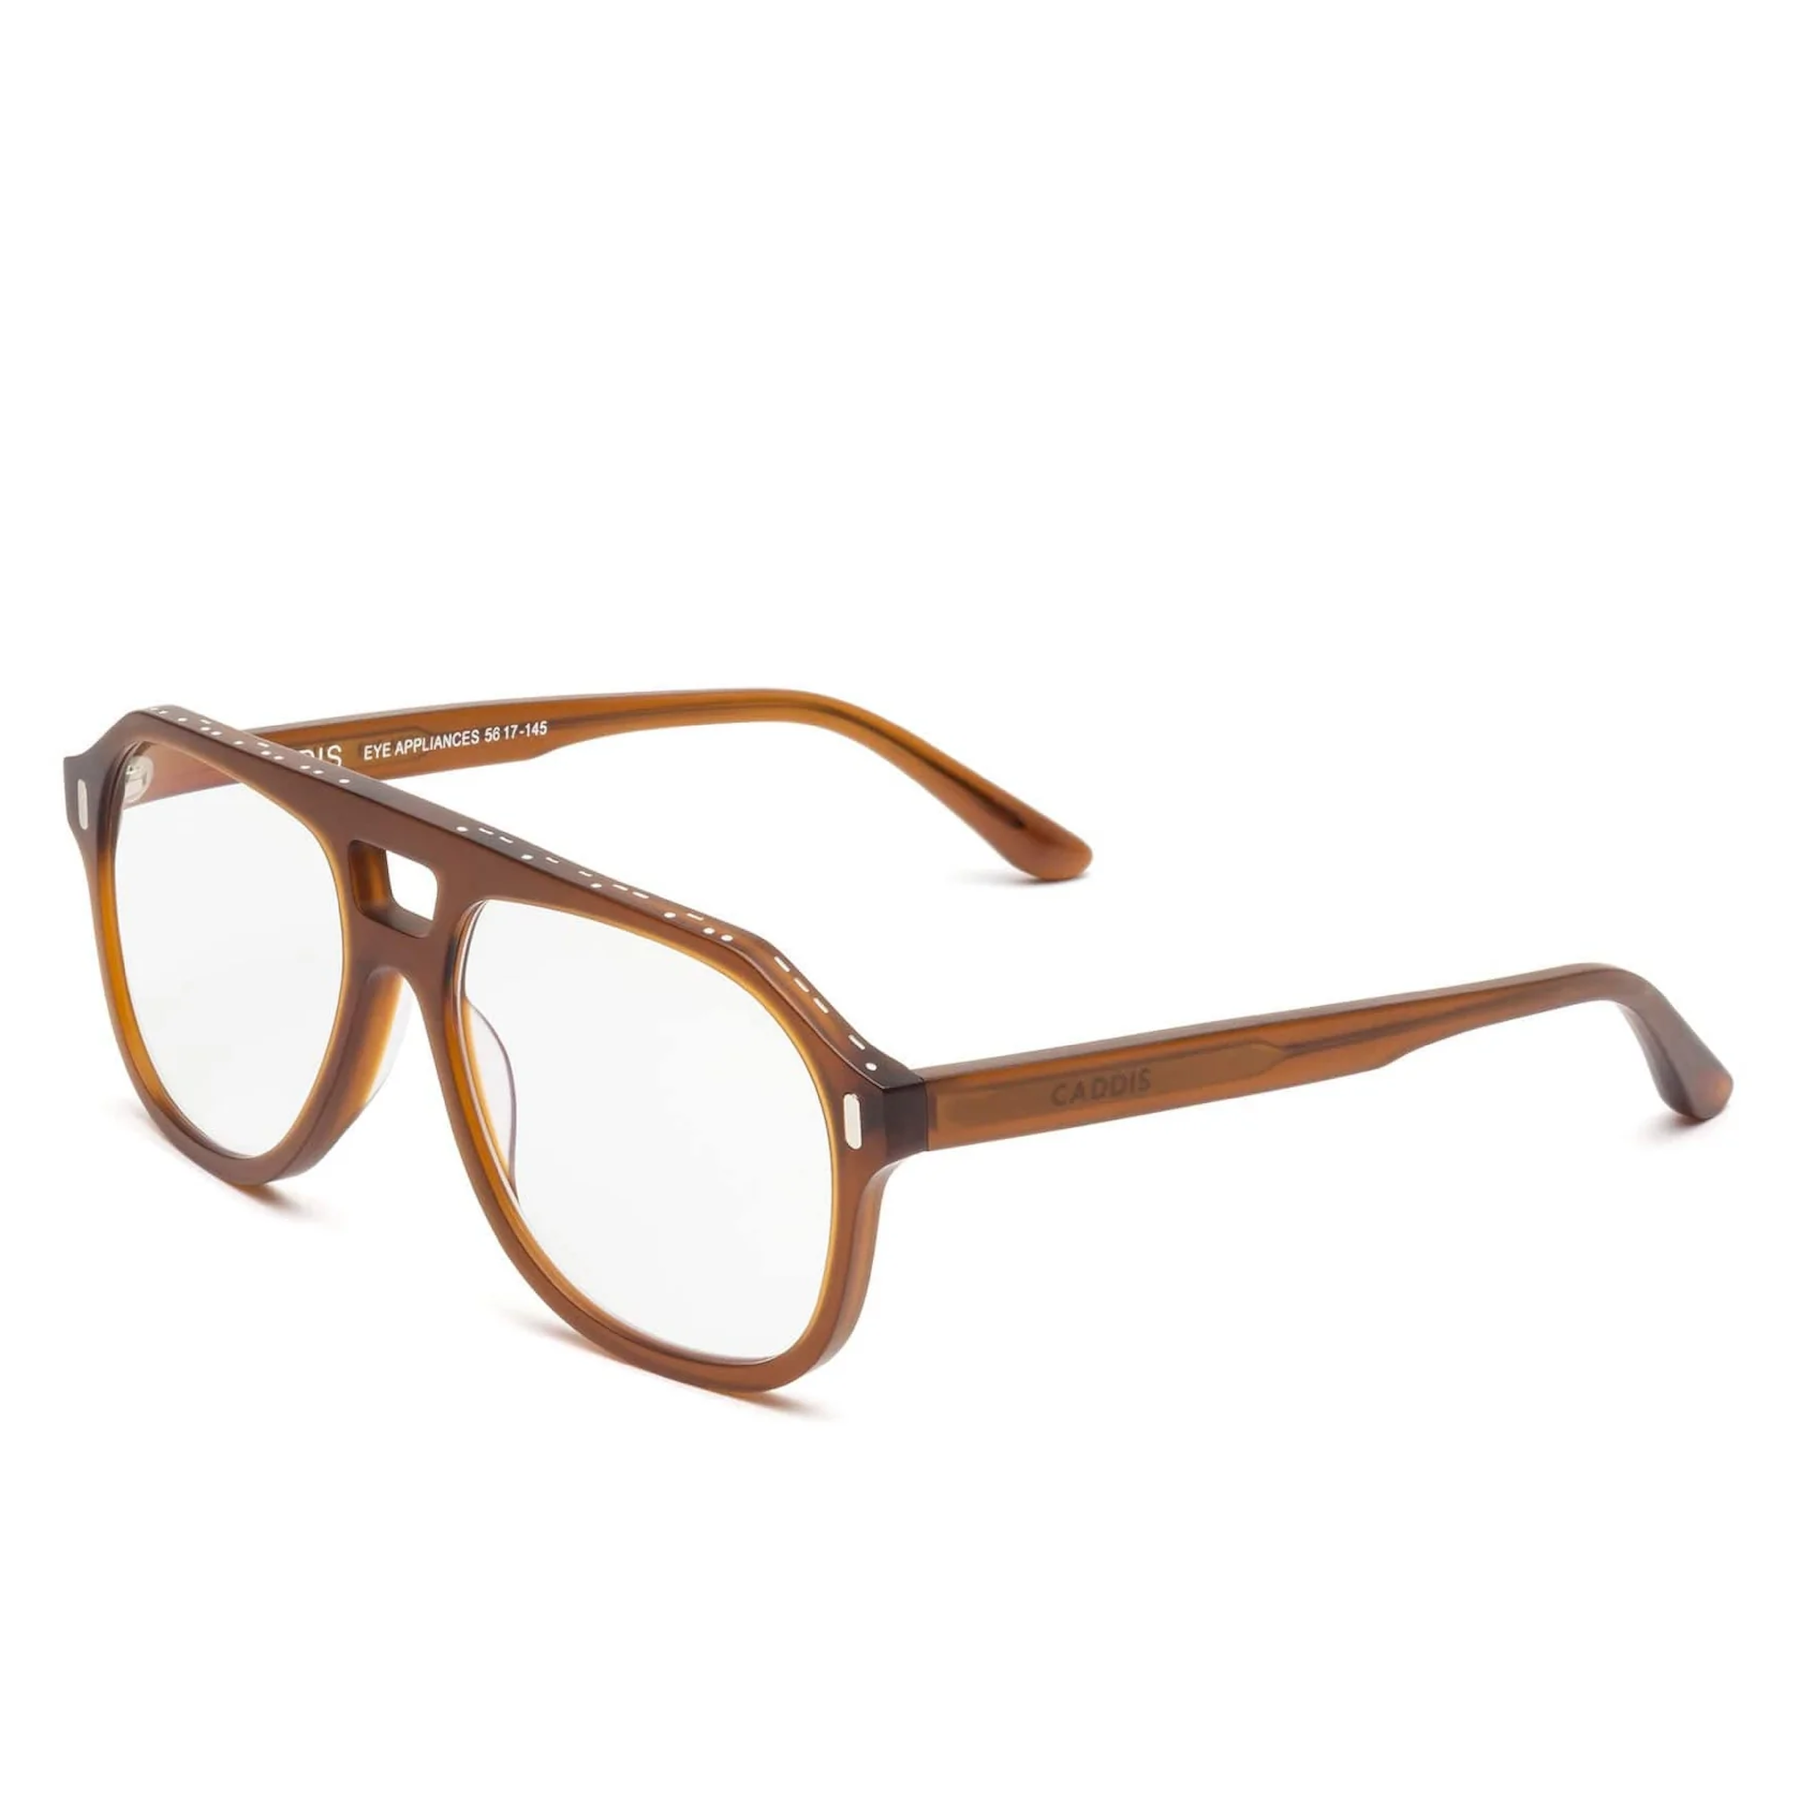 Caddis Root Cause Analysis Reading Glasses - Gopher